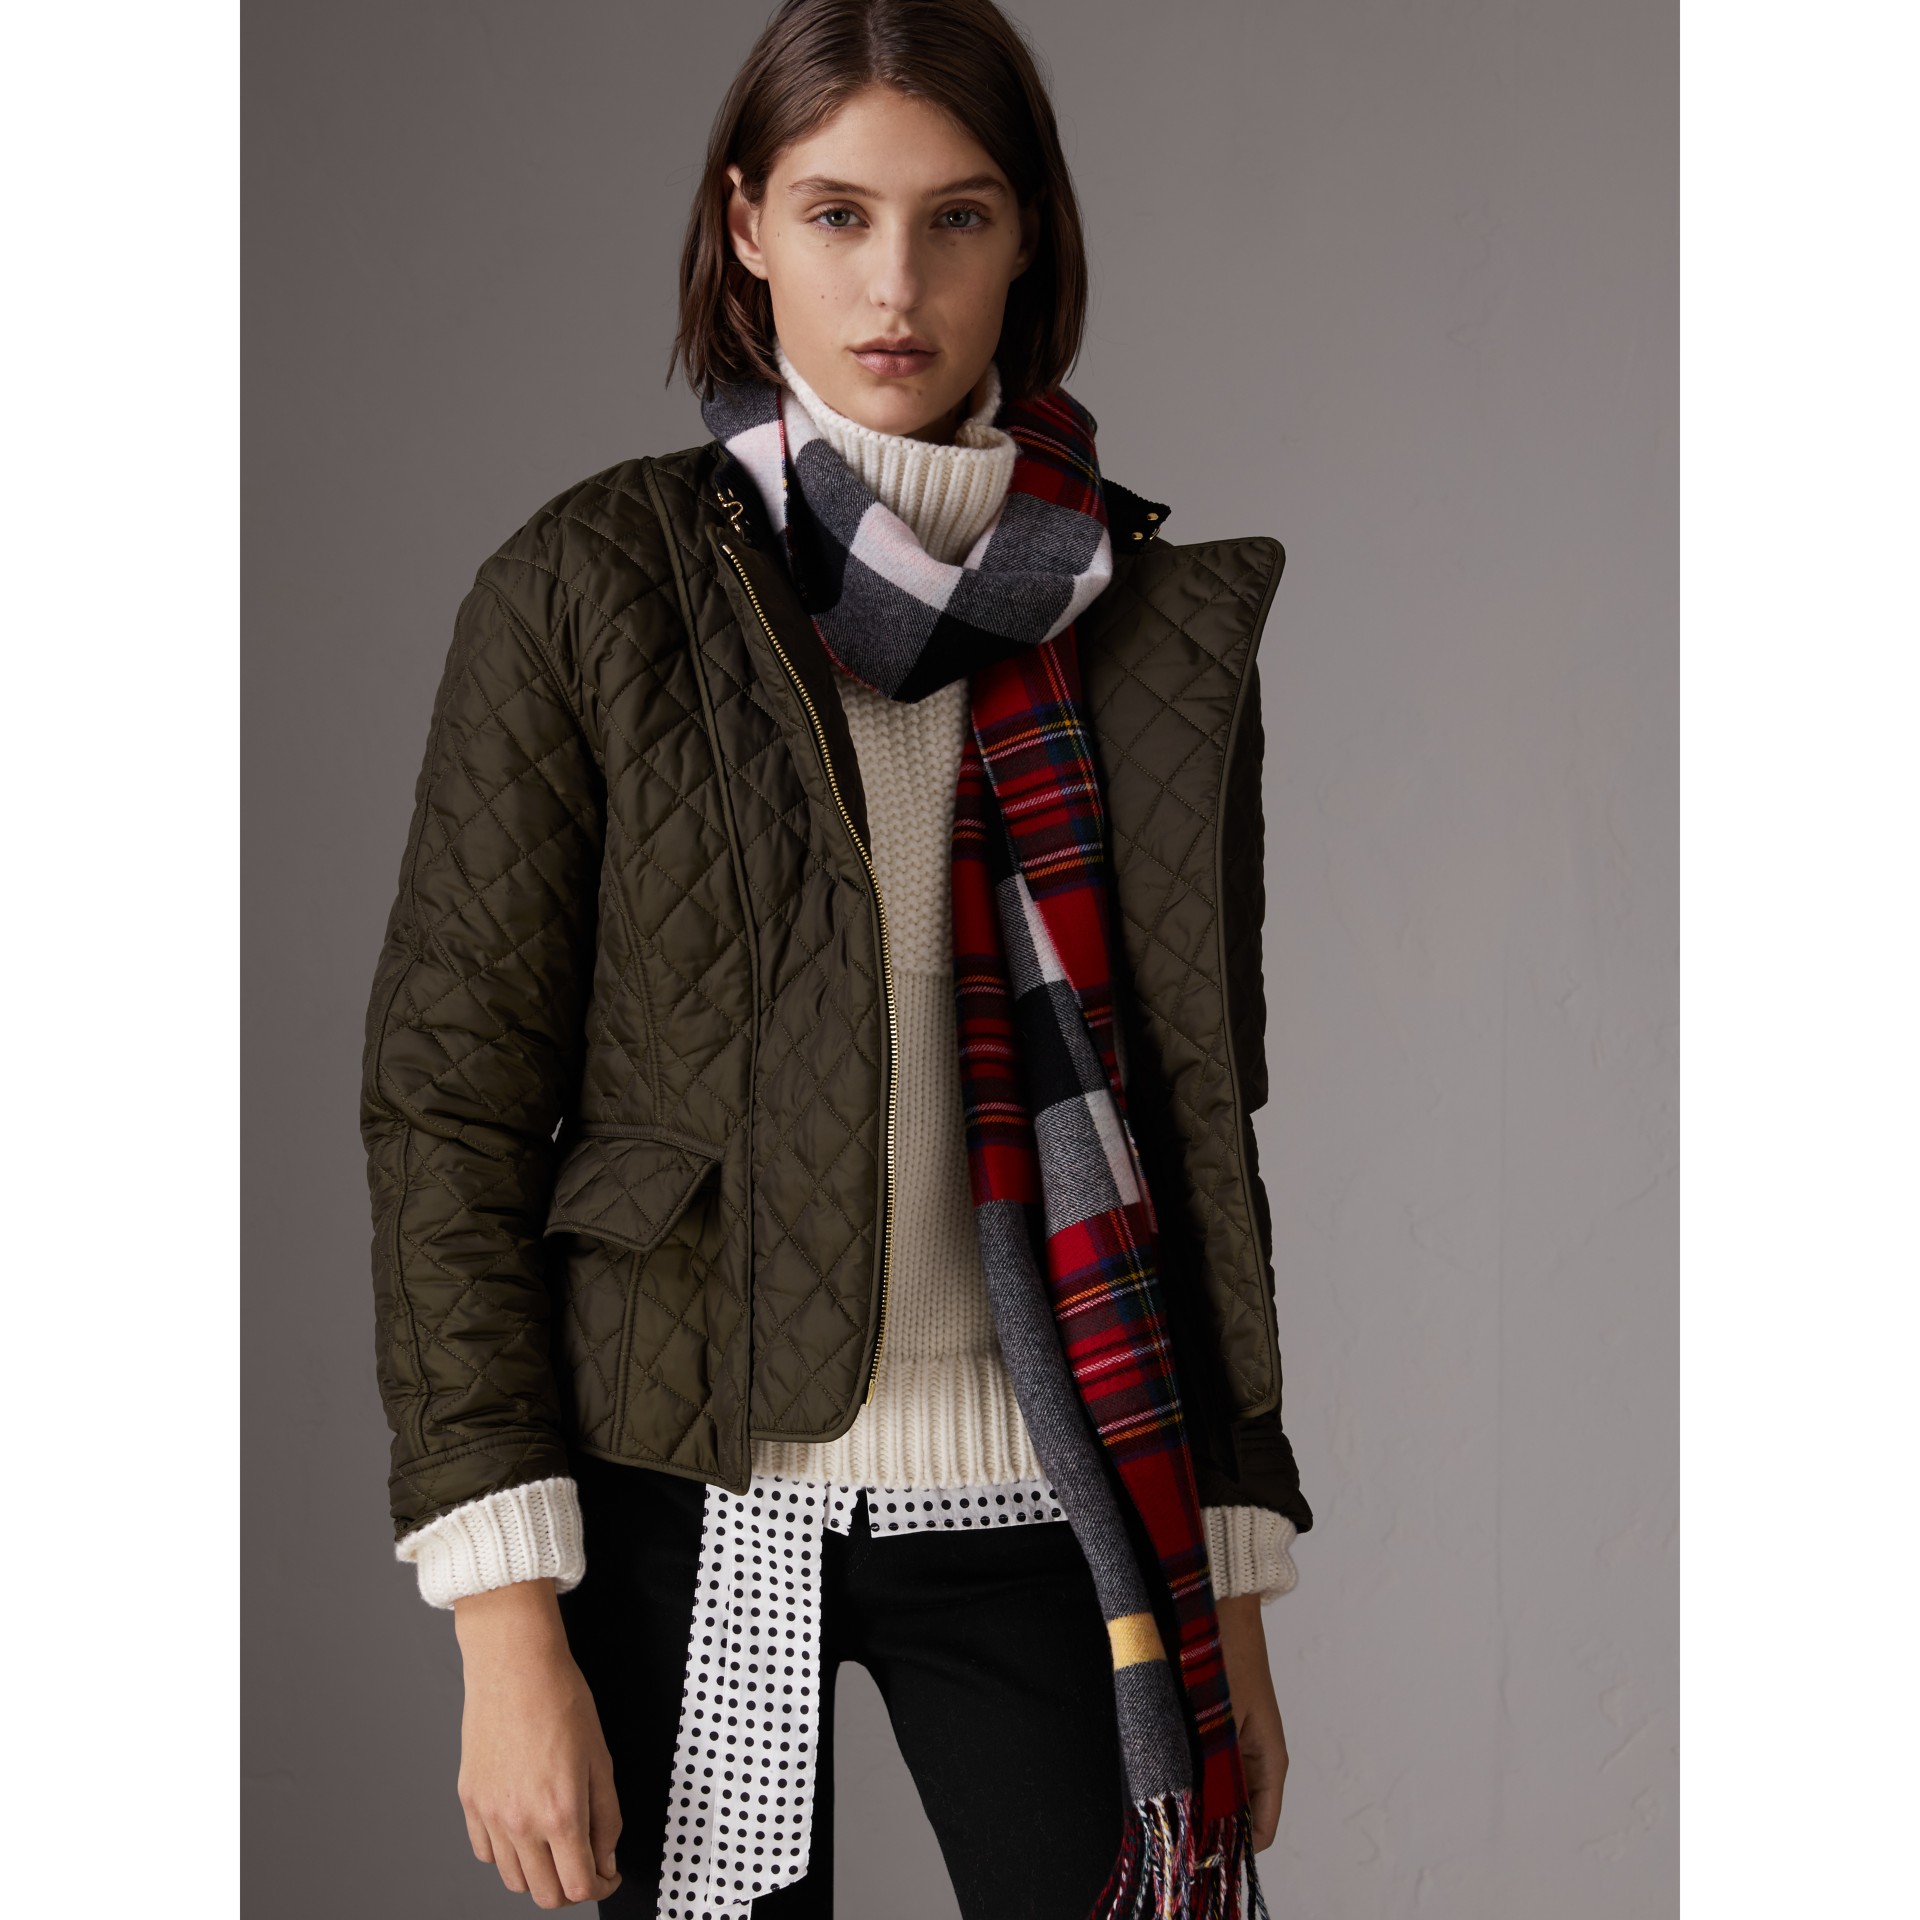 Diamond Quilted Jacket in Dark Olive - Women | Burberry United States